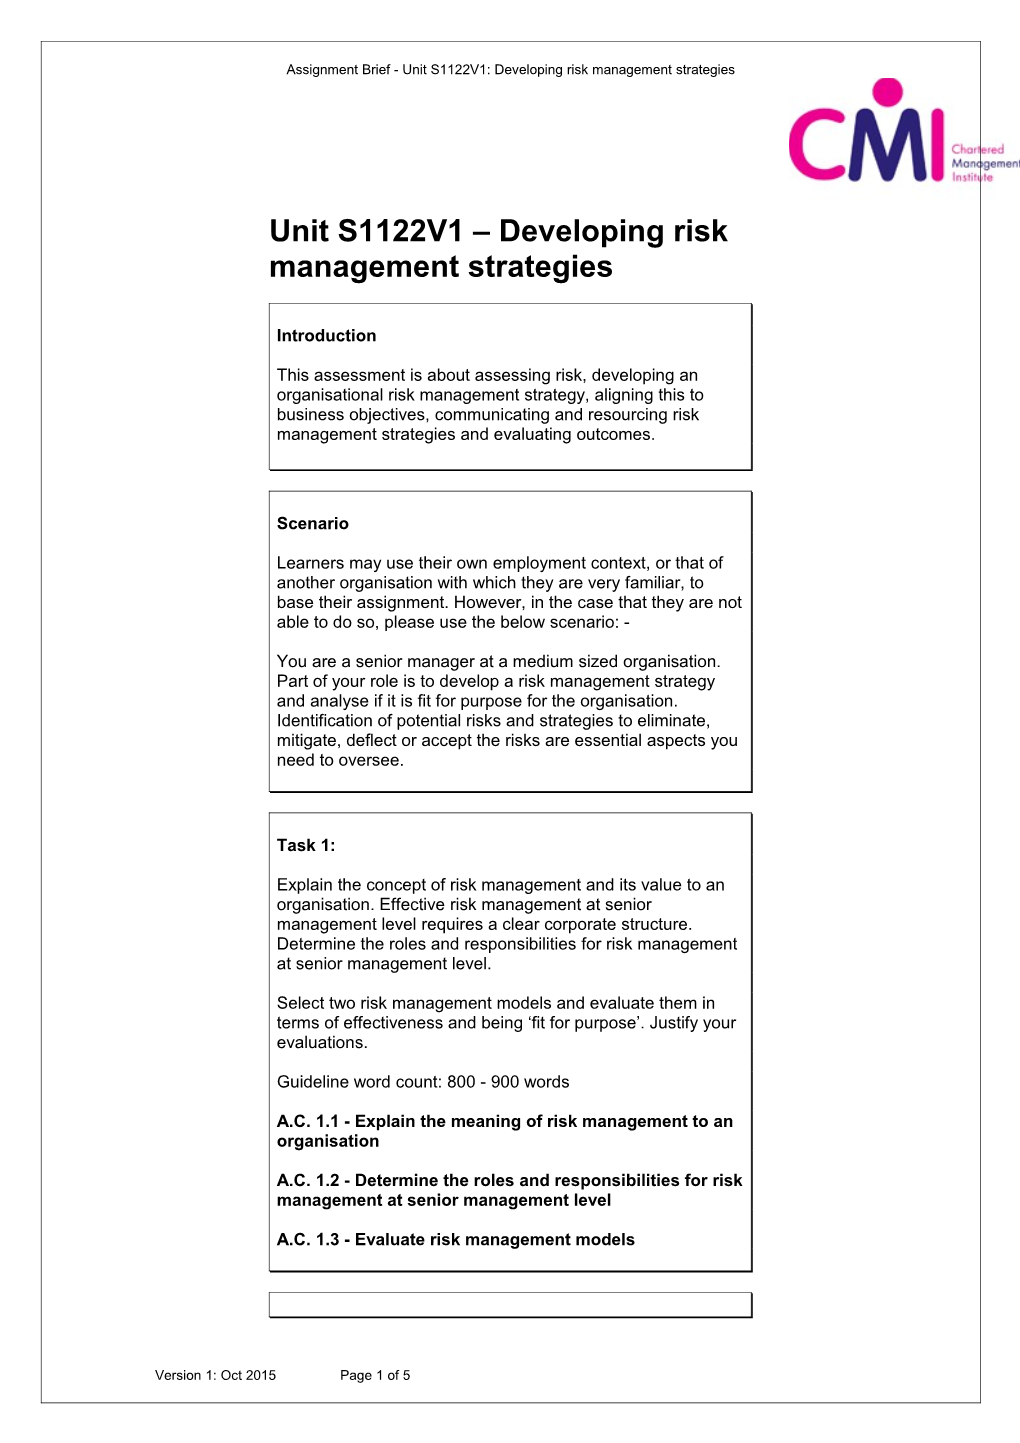 Assignment Brief - Unit S1122V1: Developing Risk Management Strategies